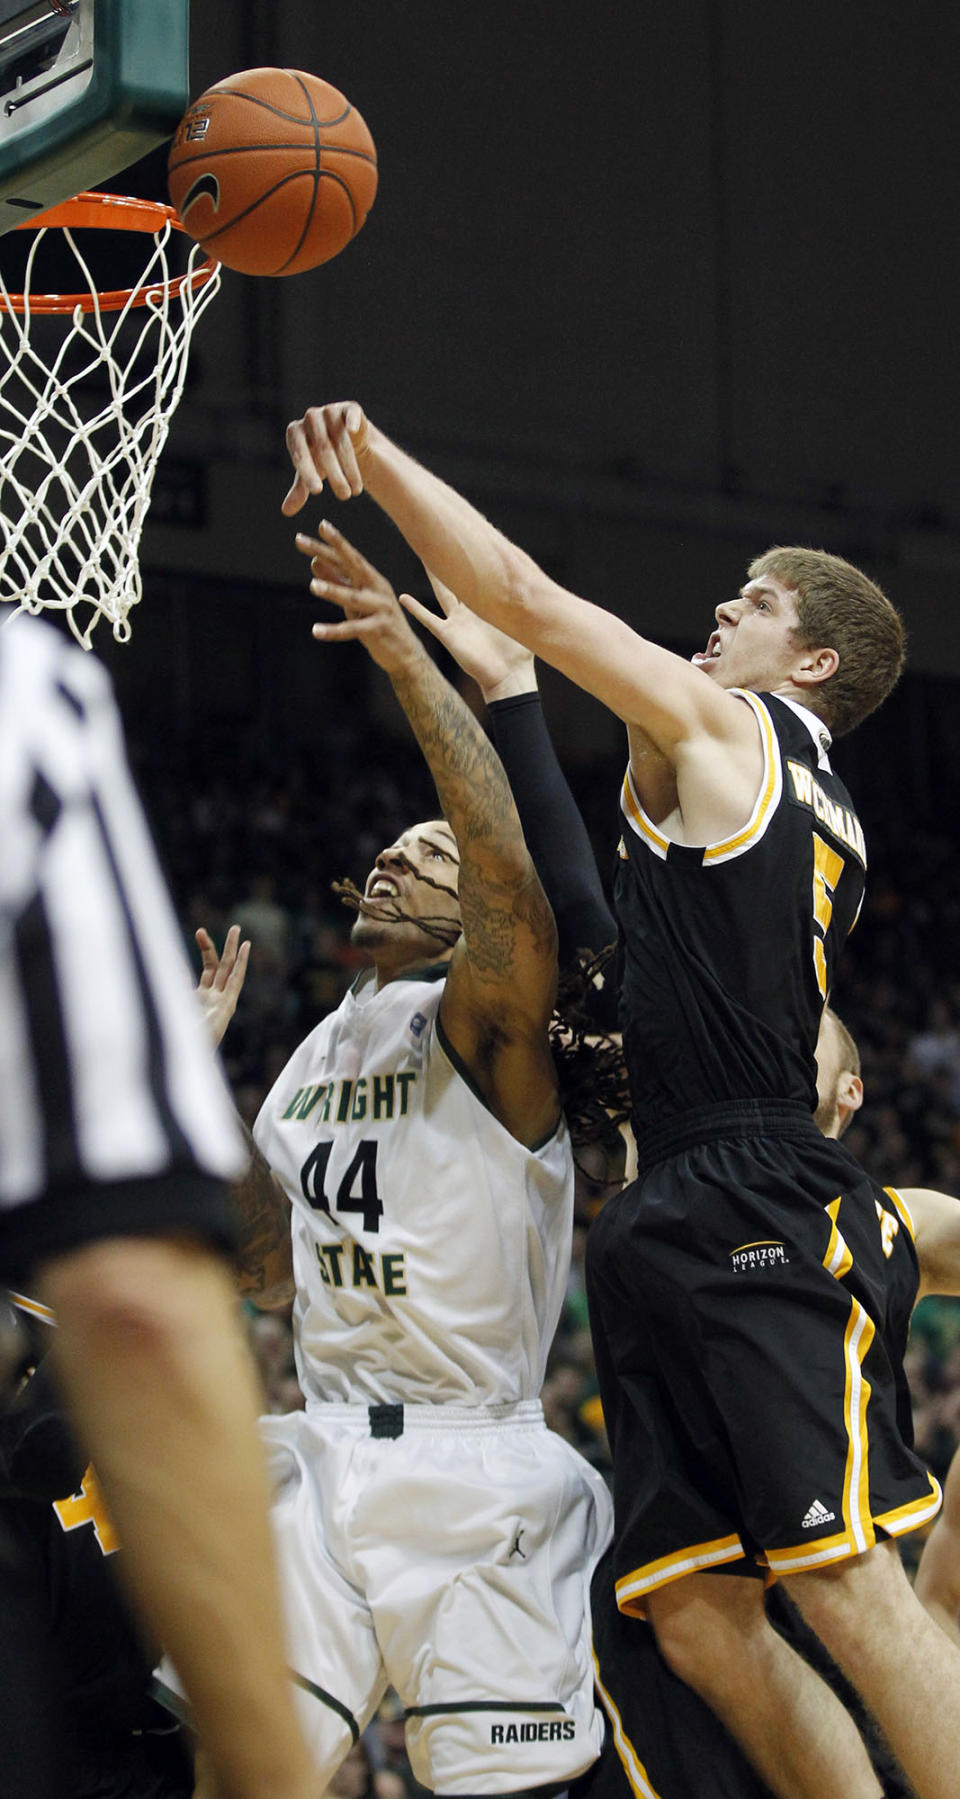 Milwaukee's Cody Whichmann, right, blocks a shot by Wright State's Tavares Sledge during the Horizon League men's tournament championship, Tuesday, March 11, 2014, in Dayton, Ohio. (AP Photo/The Dayton Daily News, Ty Greenlees) LOCAL PRINT OUT; LOCAL TV OUT; WKEF-TV OUT; WRGT-TV OUT; WDTN-TV OUT (REV-SHARE)